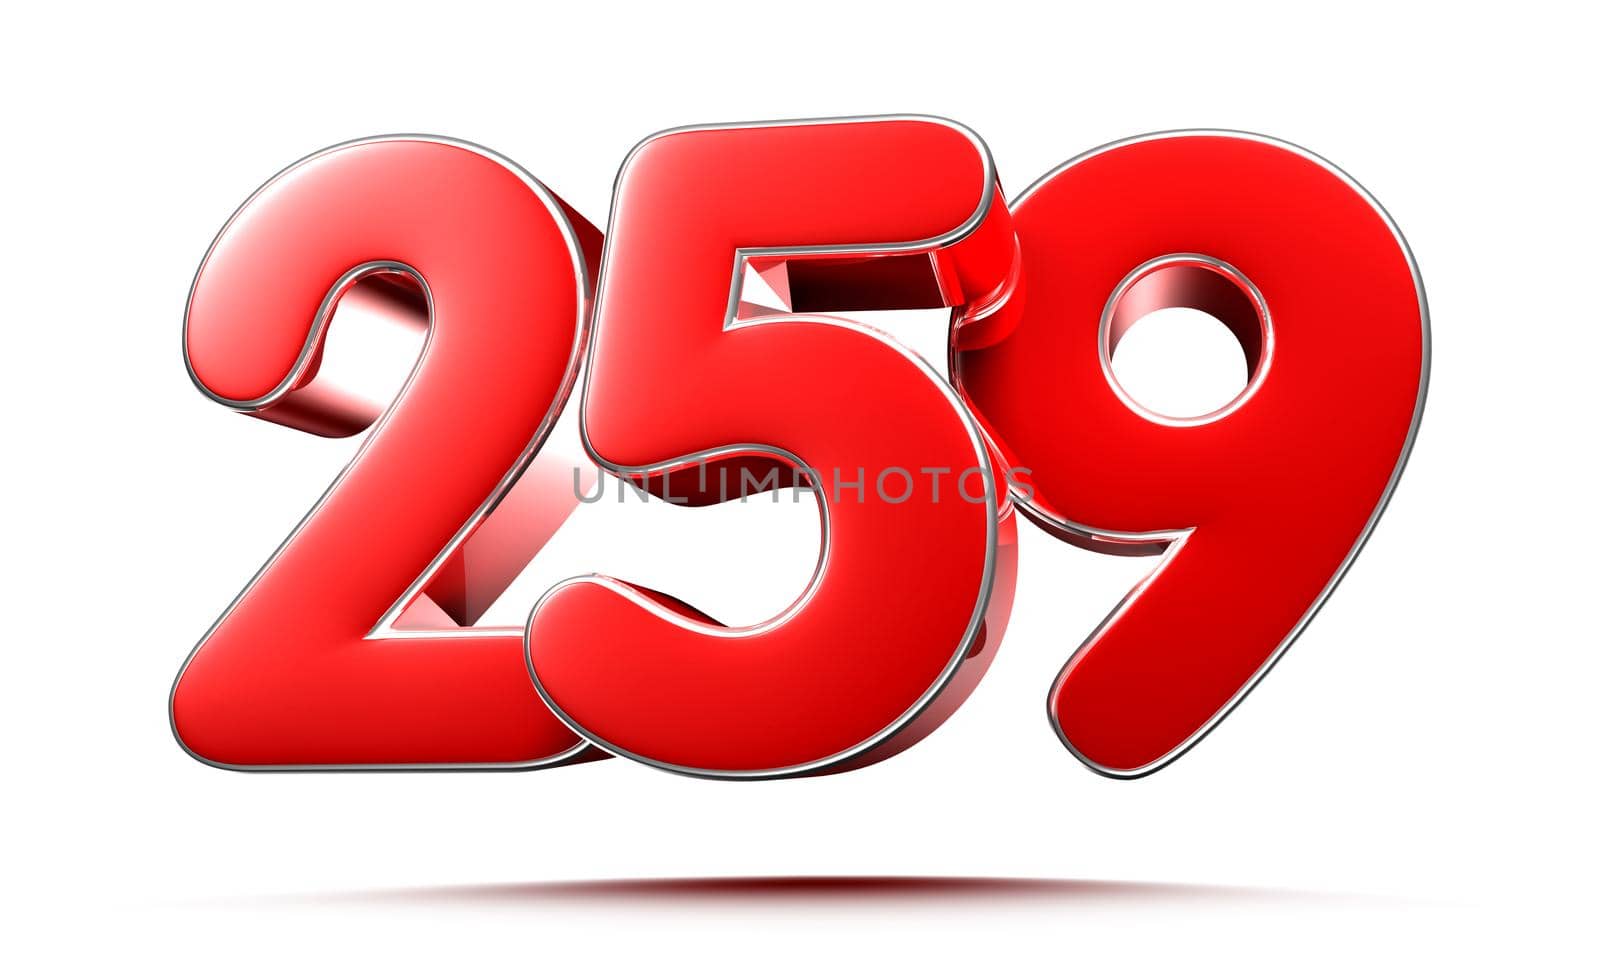 Rounded red numbers 259 on white background 3D illustration with clipping path